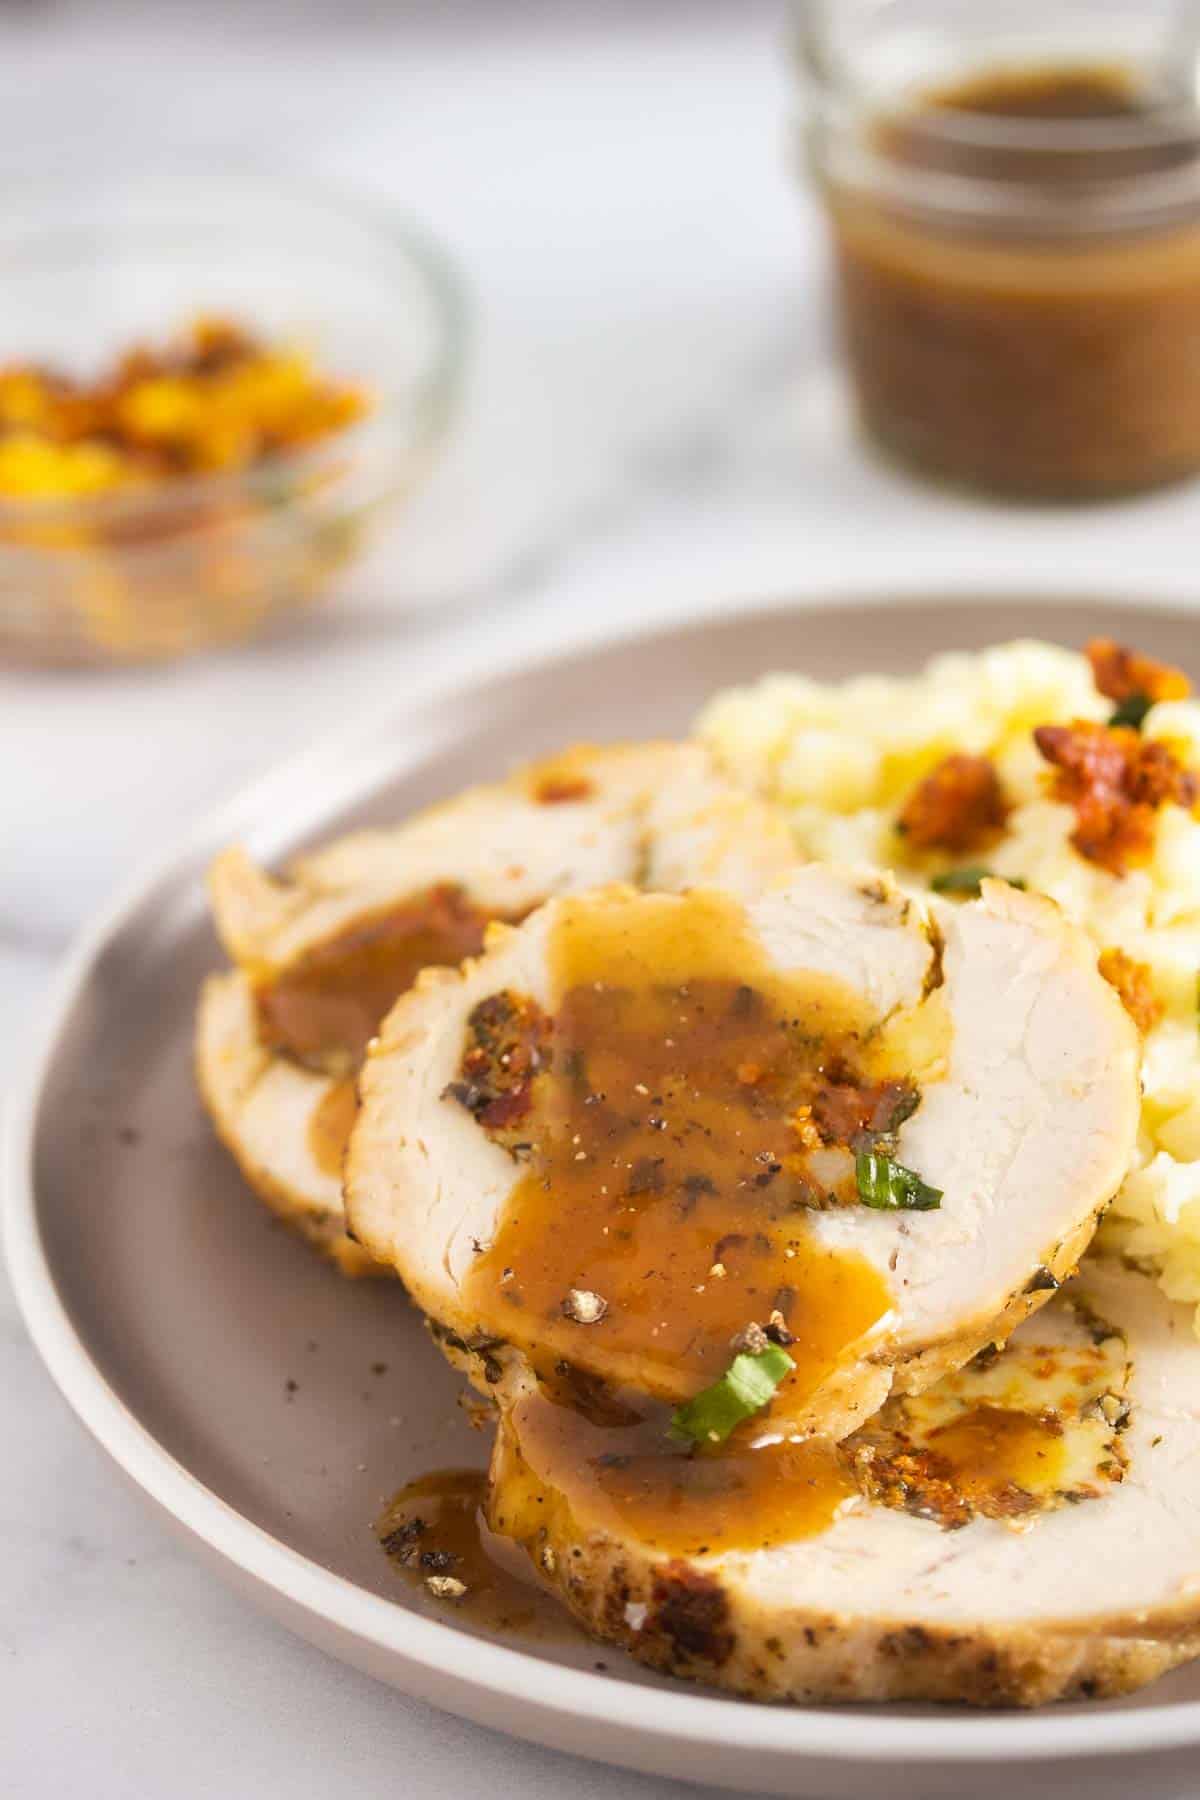 Stuffed turkey breast served with mashed potatoes on a round plate